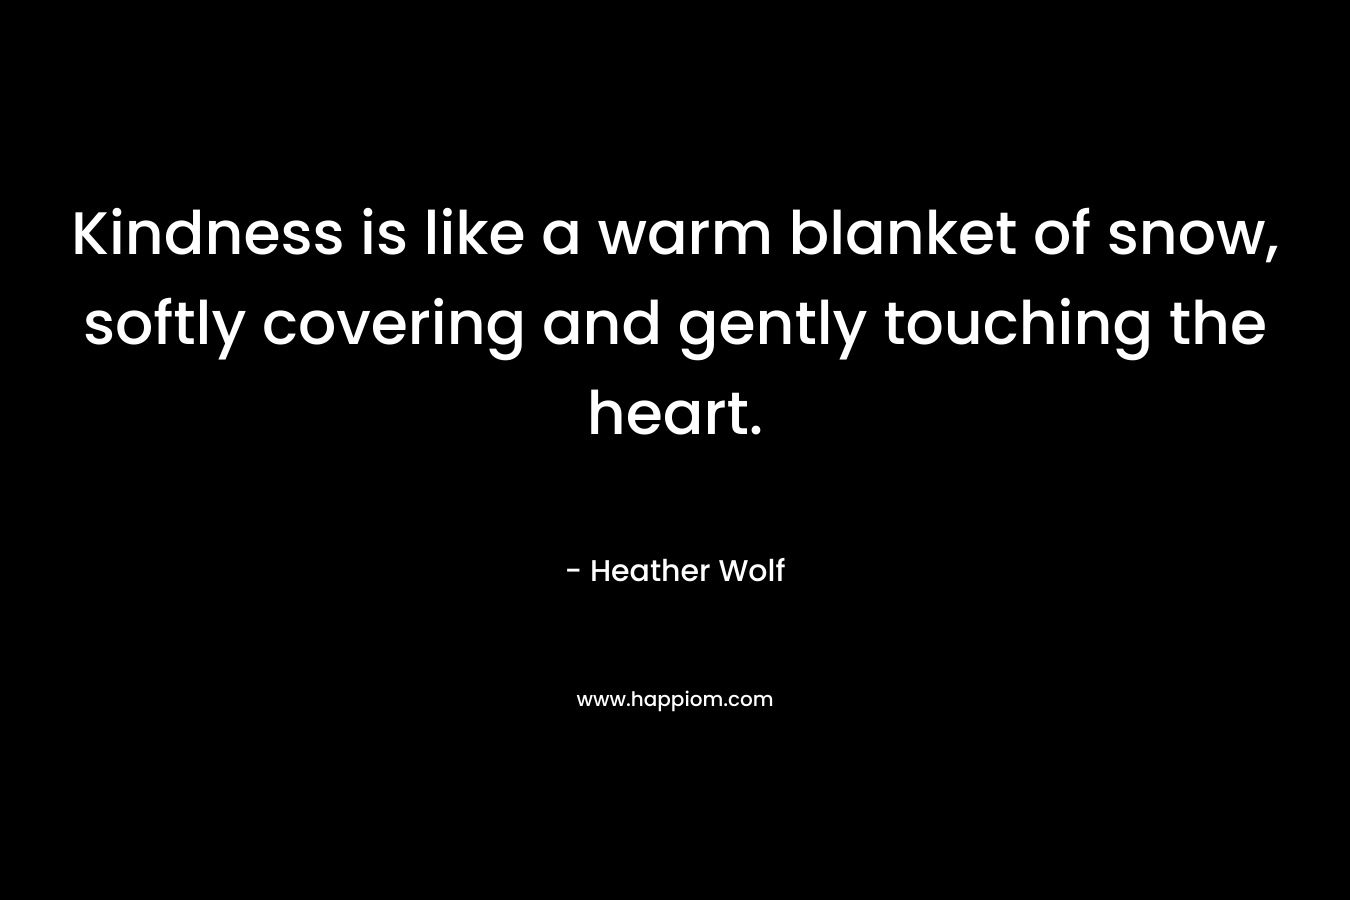 Kindness is like a warm blanket of snow, softly covering and gently touching the heart. – Heather Wolf